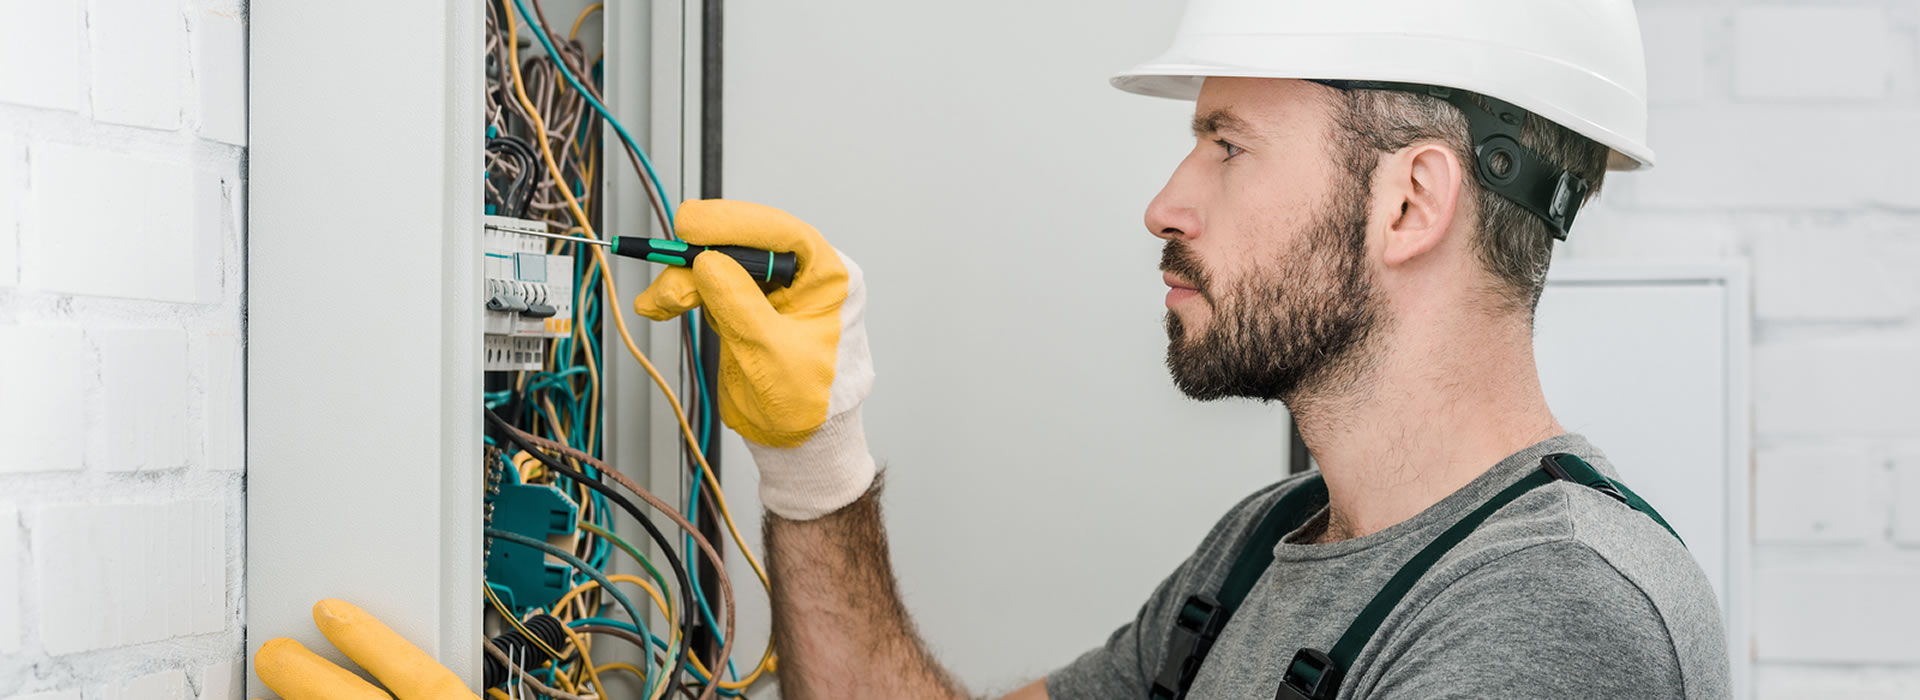 Electrician in Cranberry Township, PA